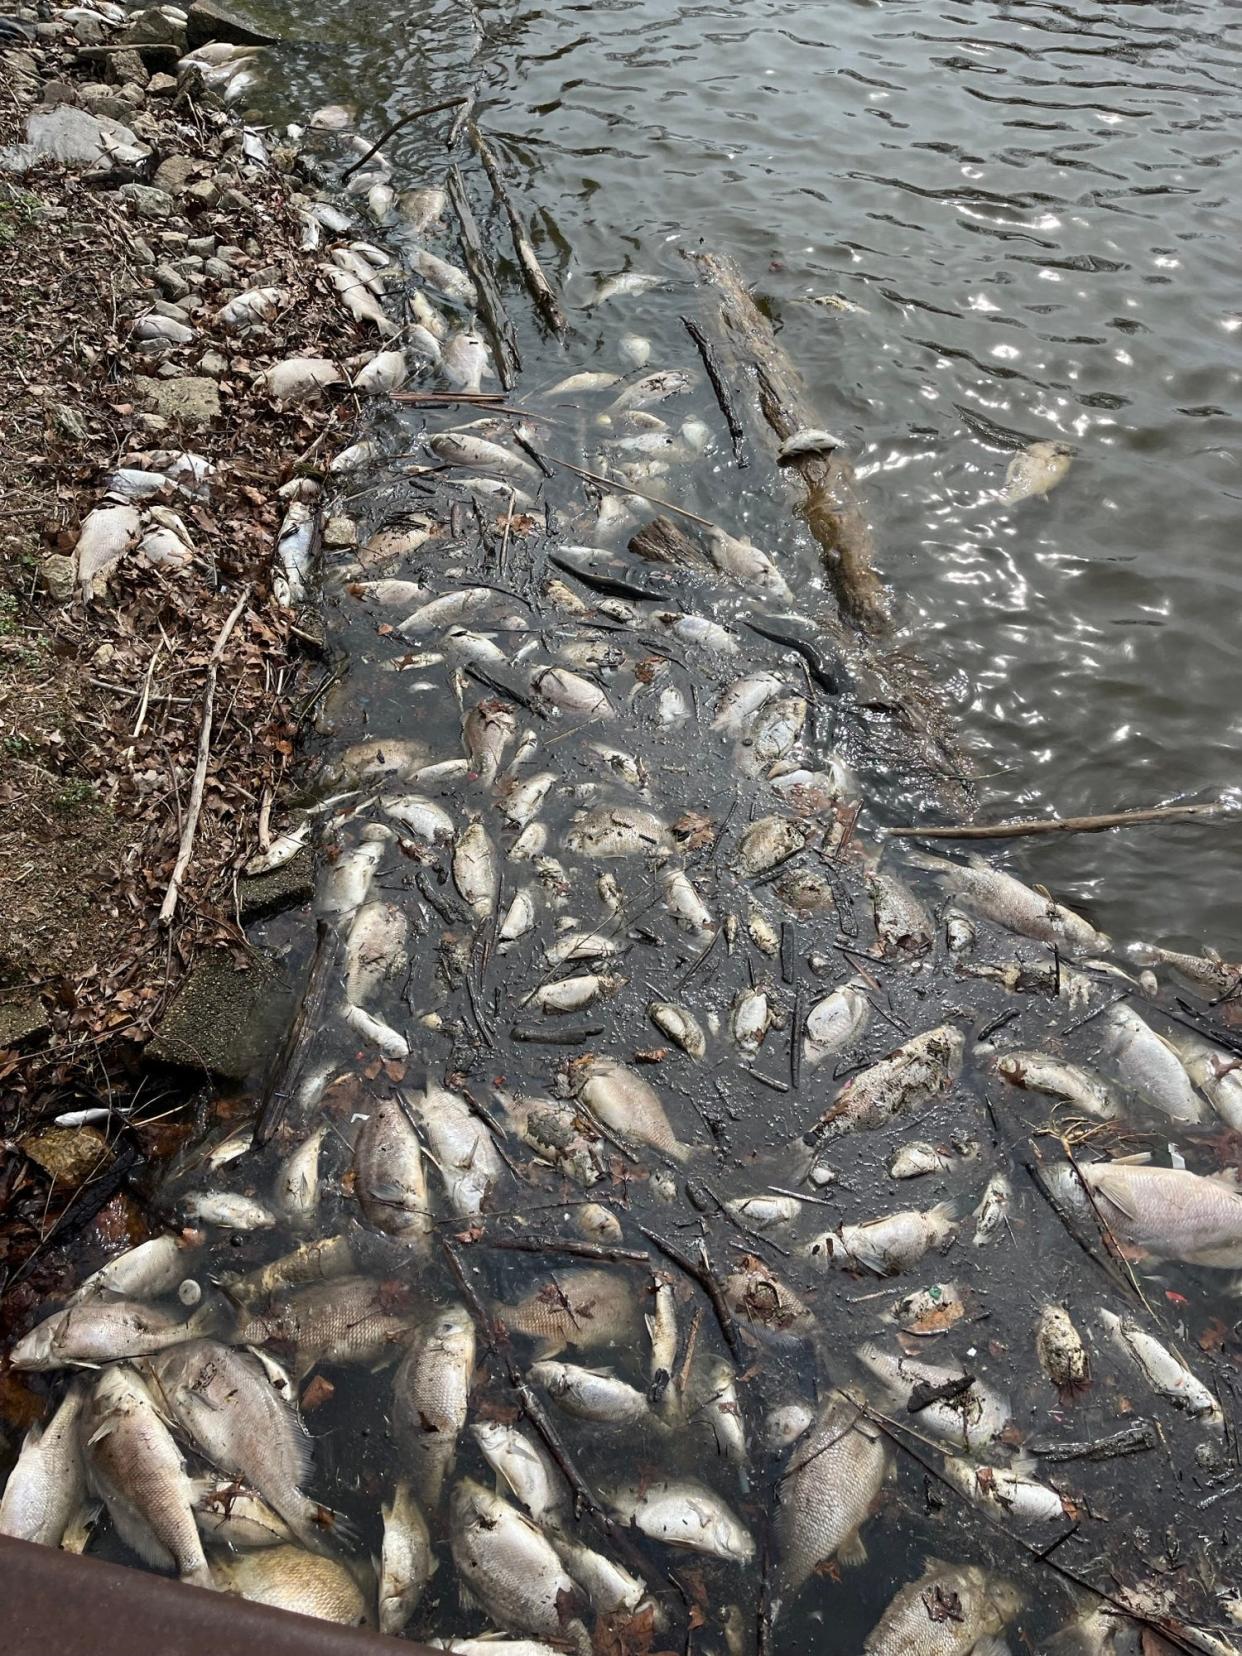 The DNR announced Friday fish in Lake Macatawa are dying from viral hemorrhagic septicemia, a highly contagious, fatal fish disease.